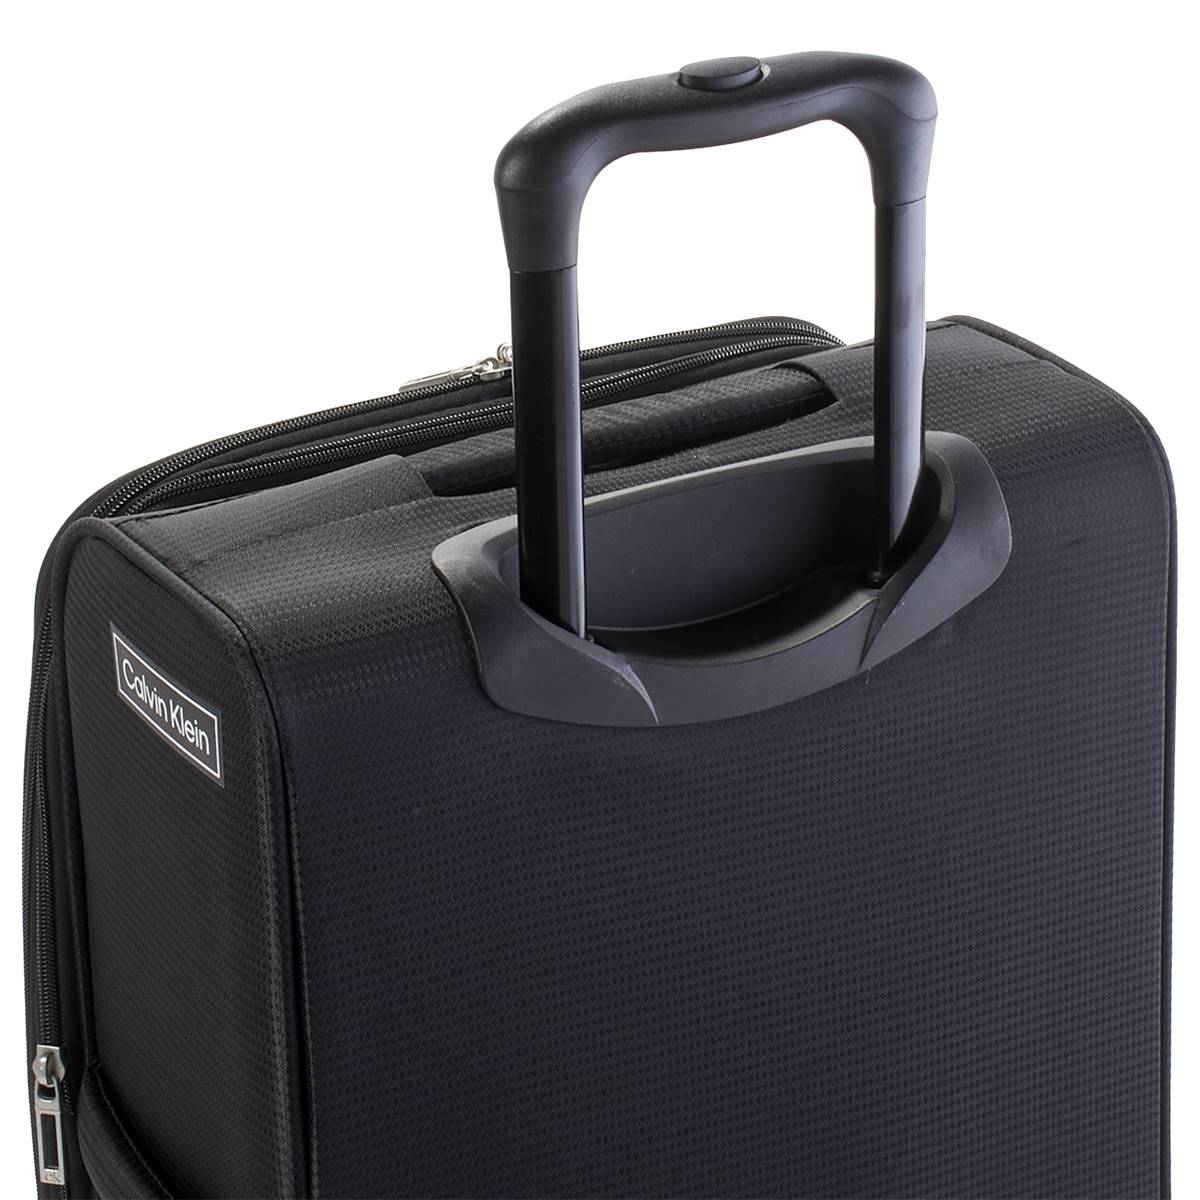 Calvin Klein Travel Line 20in. Carry On Luggage